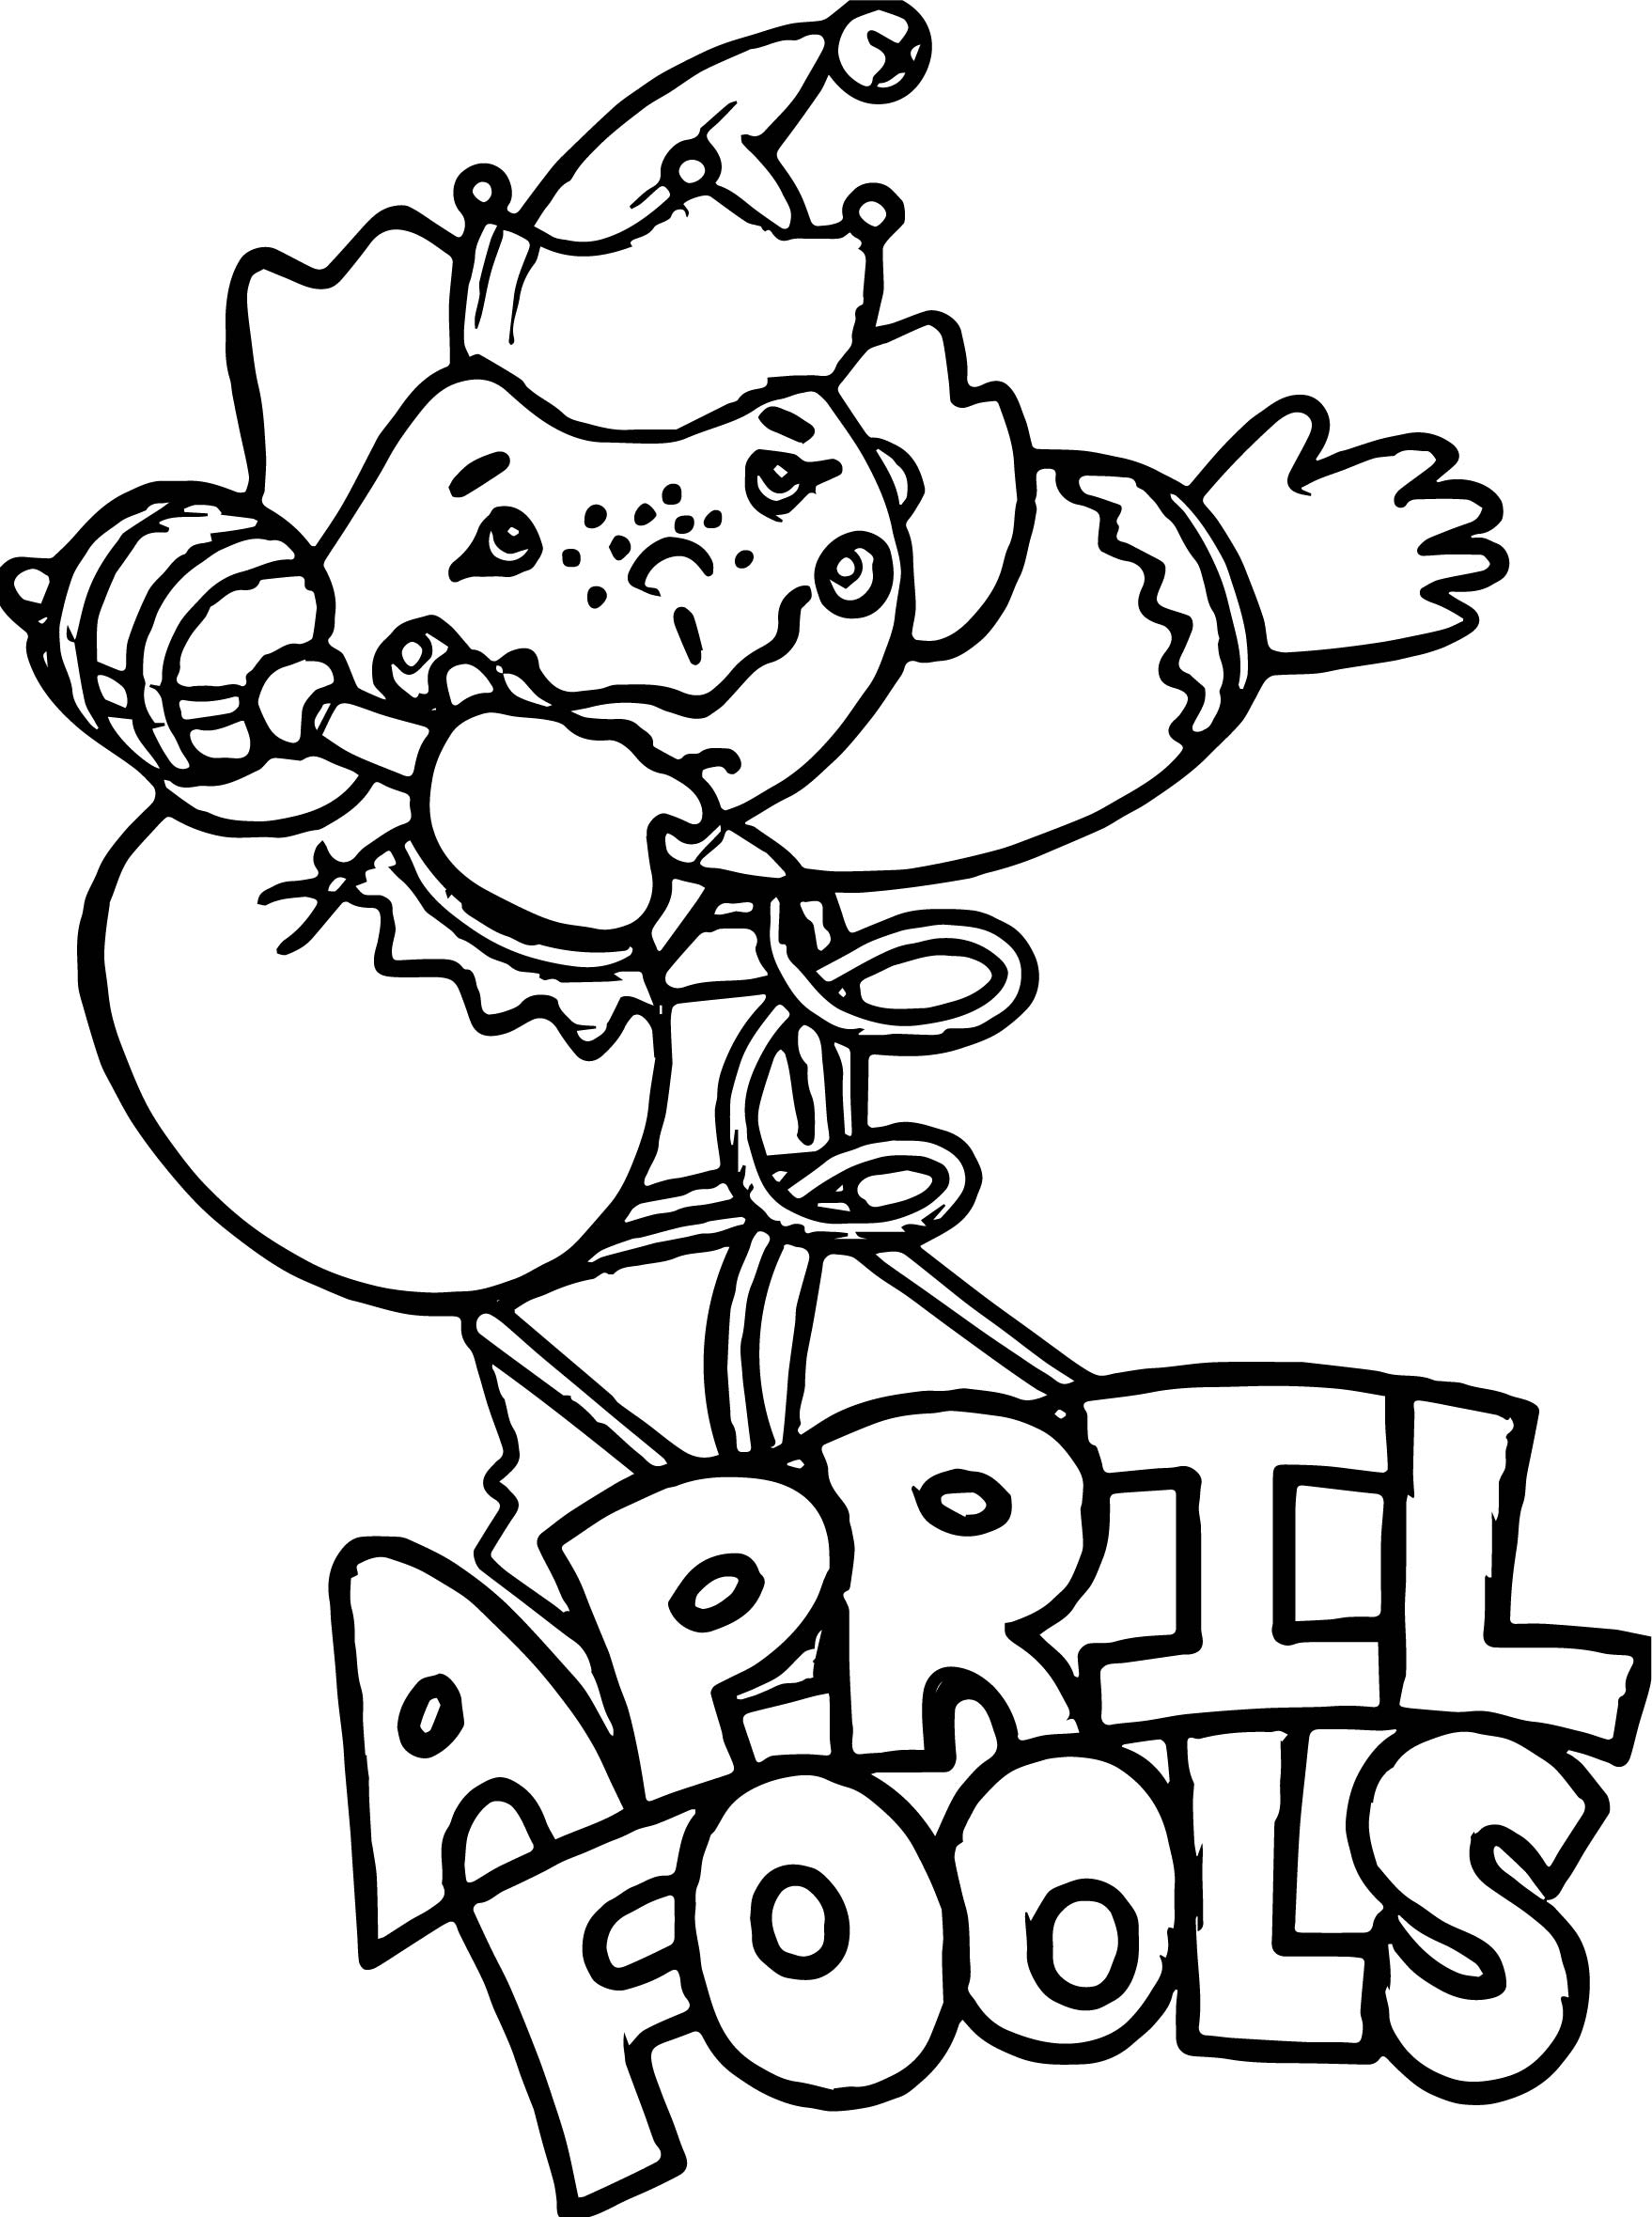 april-fools-coloring-pages-coloring-pages